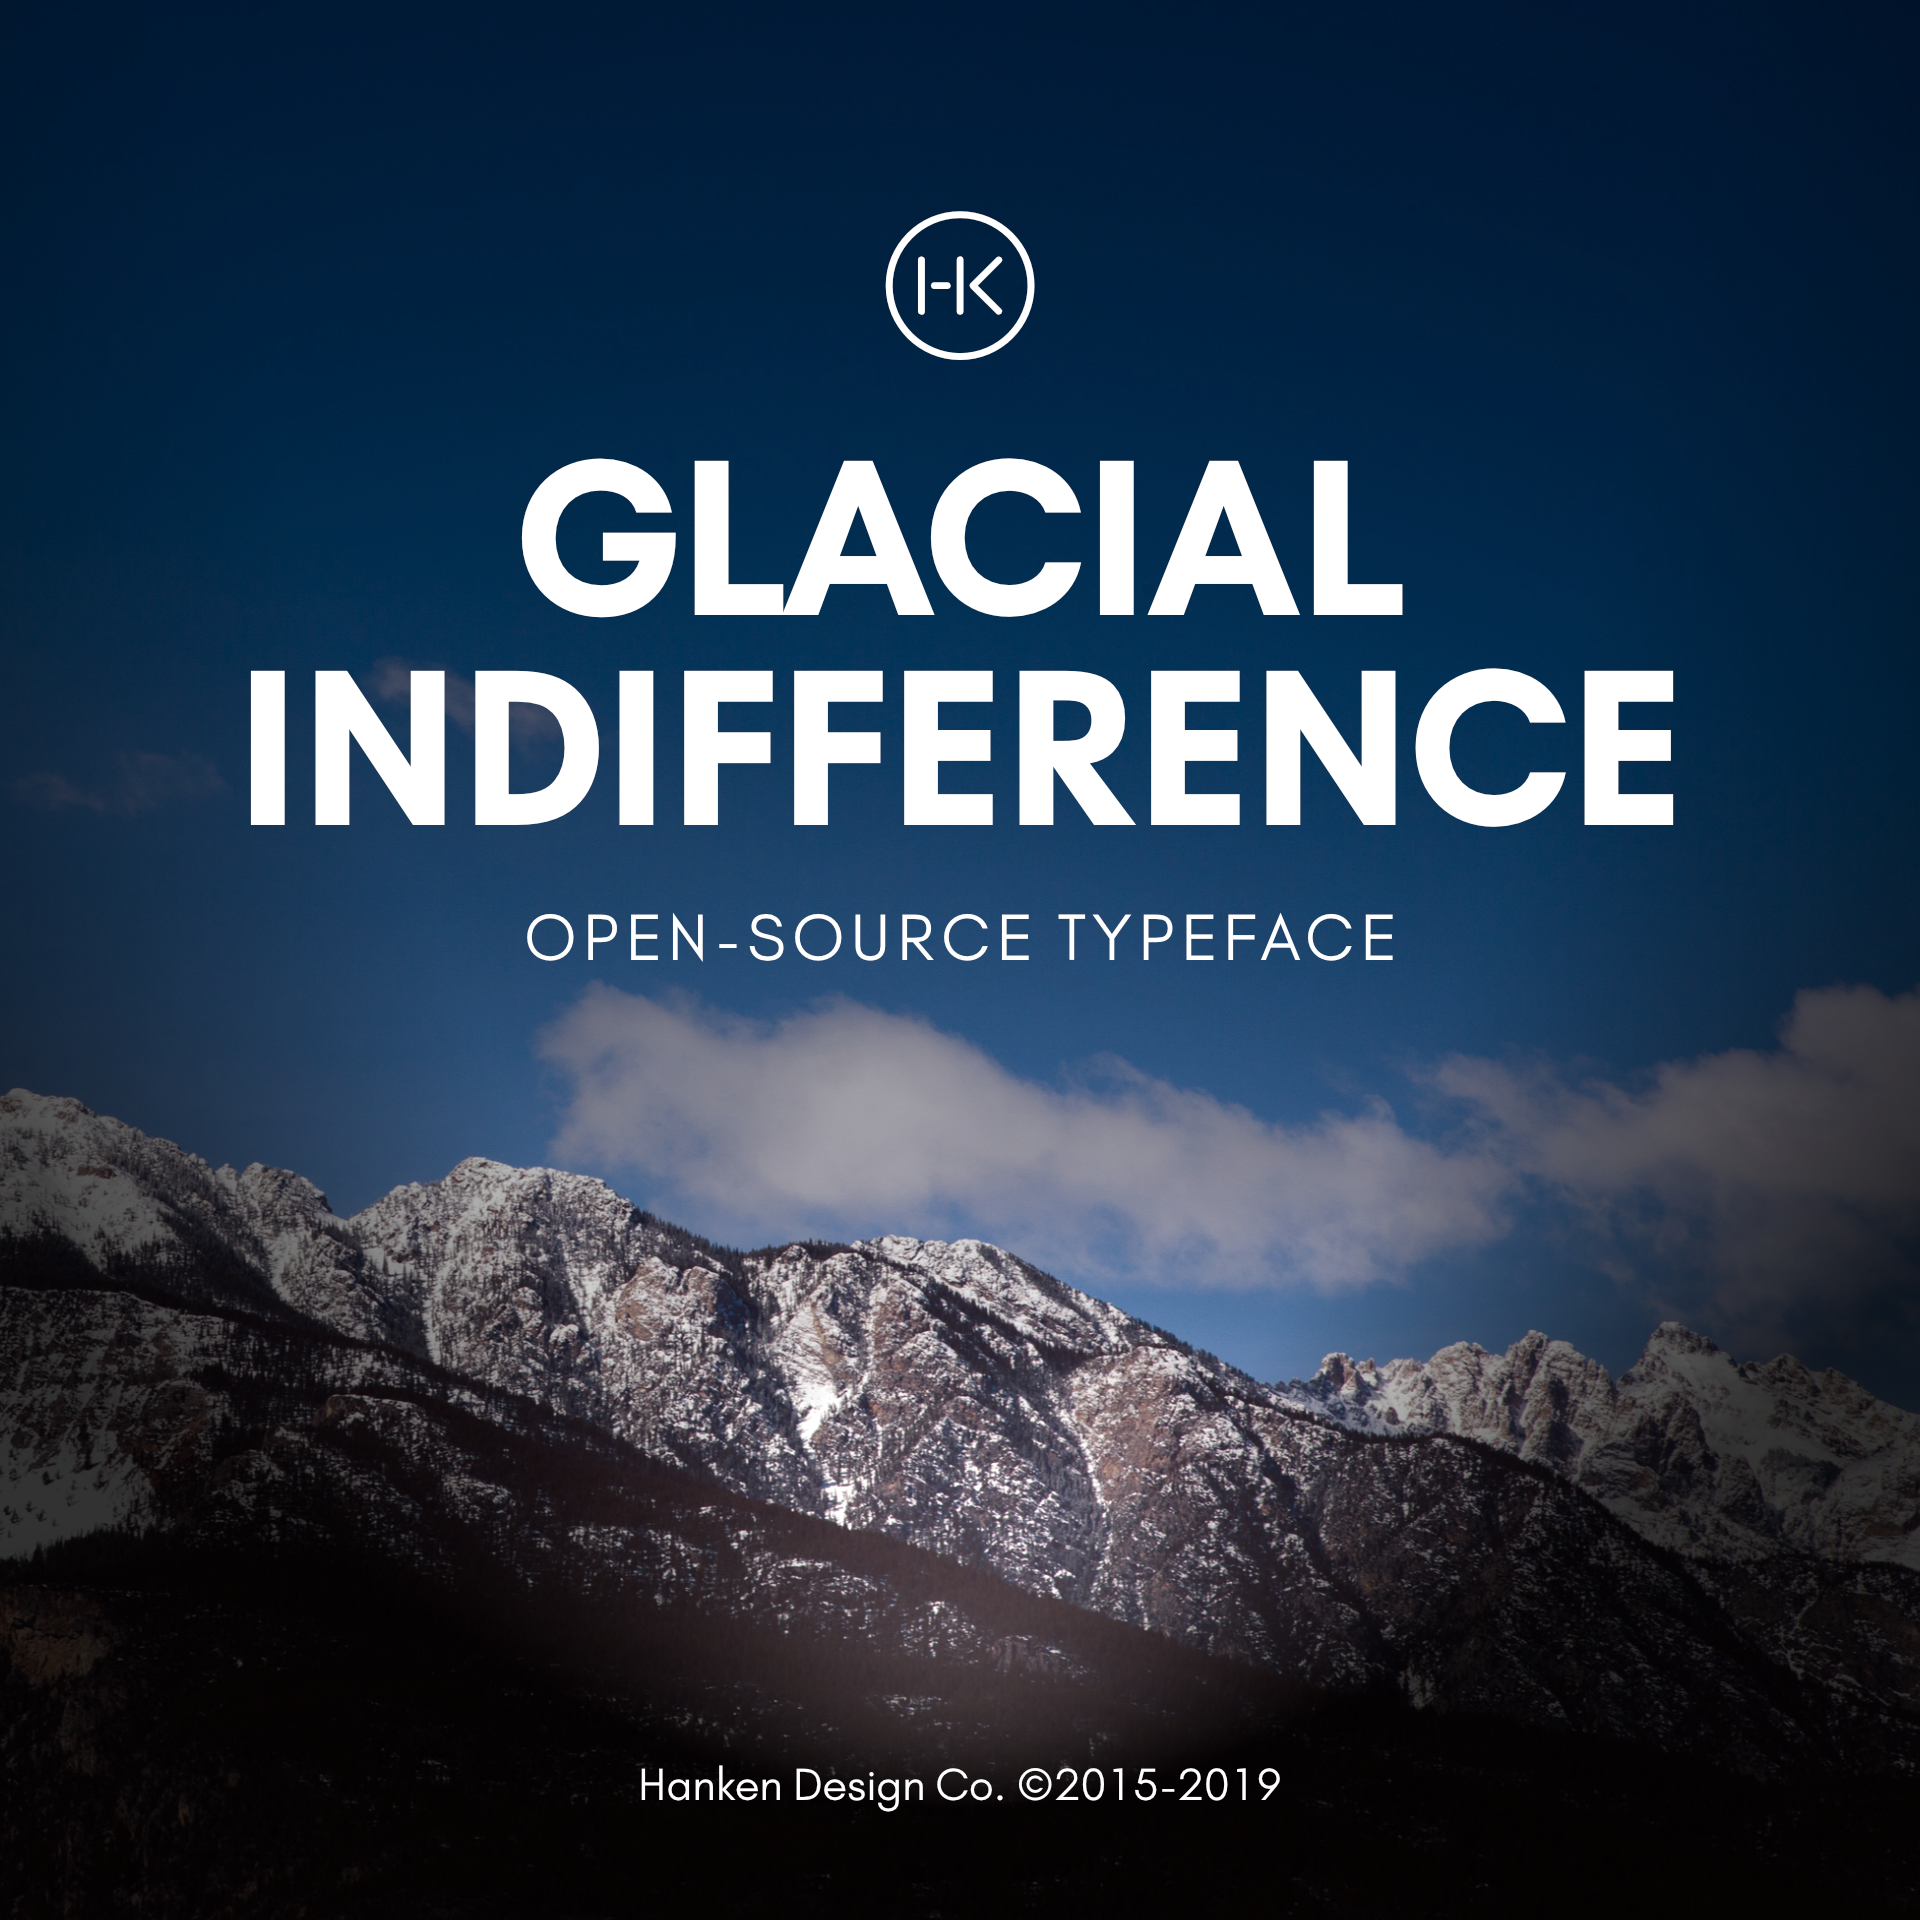 102-glacial-indifference